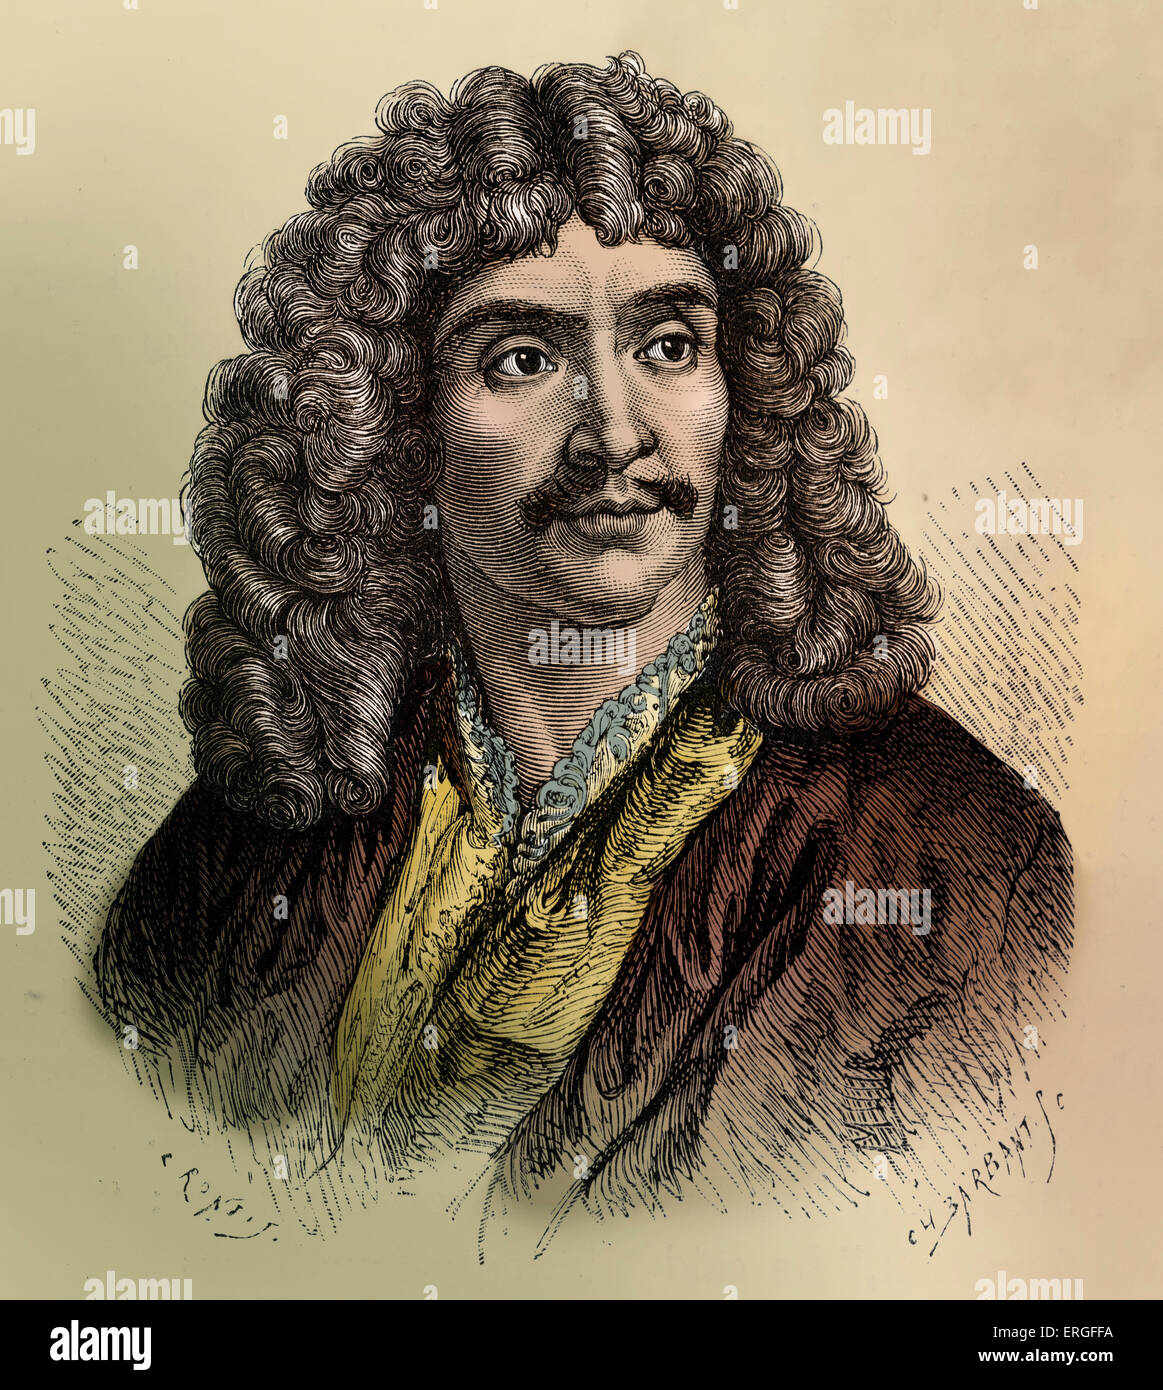 Jean-Baptiste Poquelin, also known by his stage name, Molière, was a French  playwright and actor. Molière:1622 – 1673 Stock Photo - Alamy